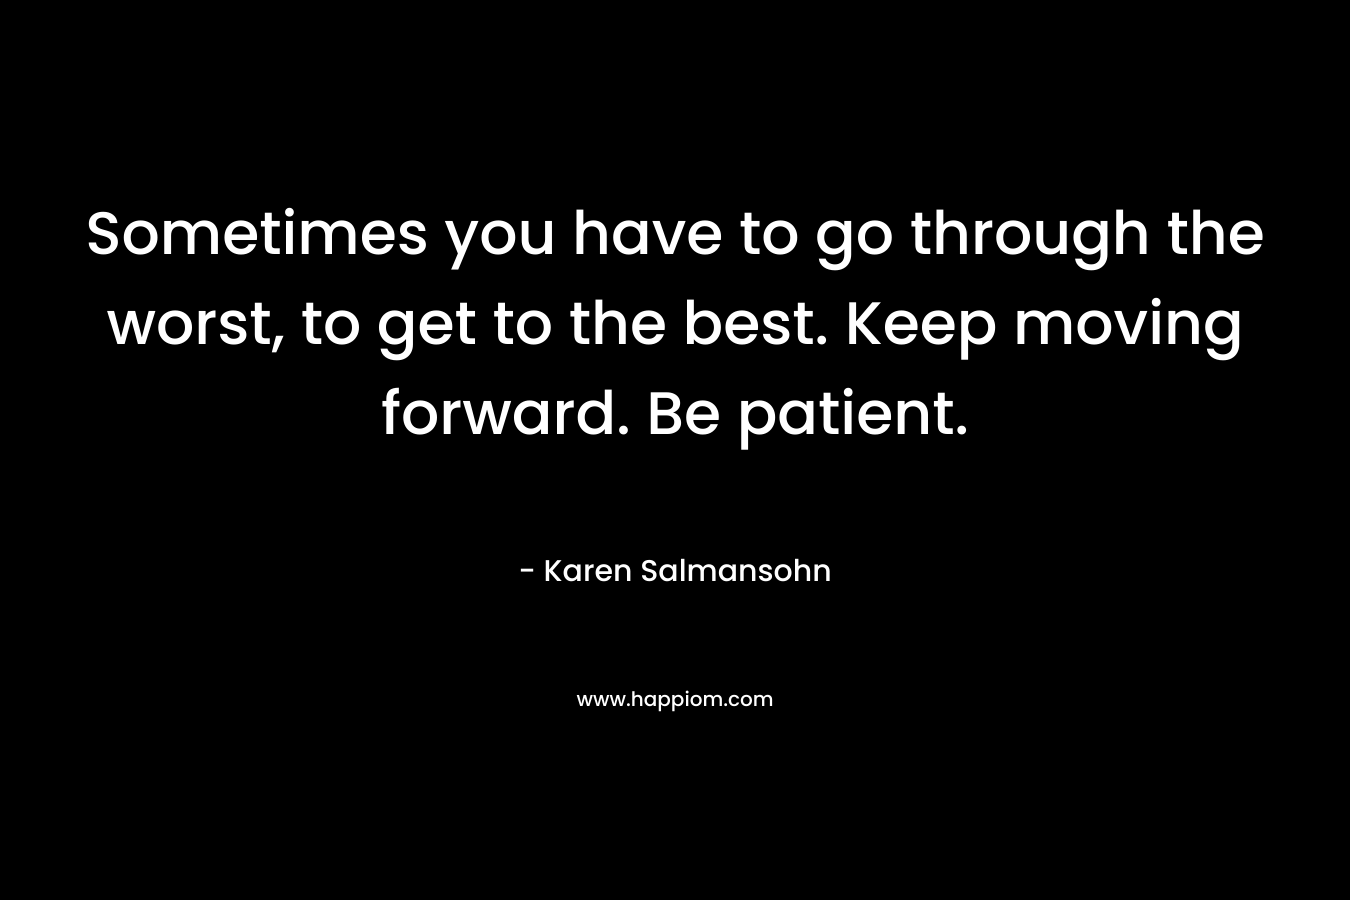 Sometimes you have to go through the worst, to get to the best. Keep moving forward. Be patient.